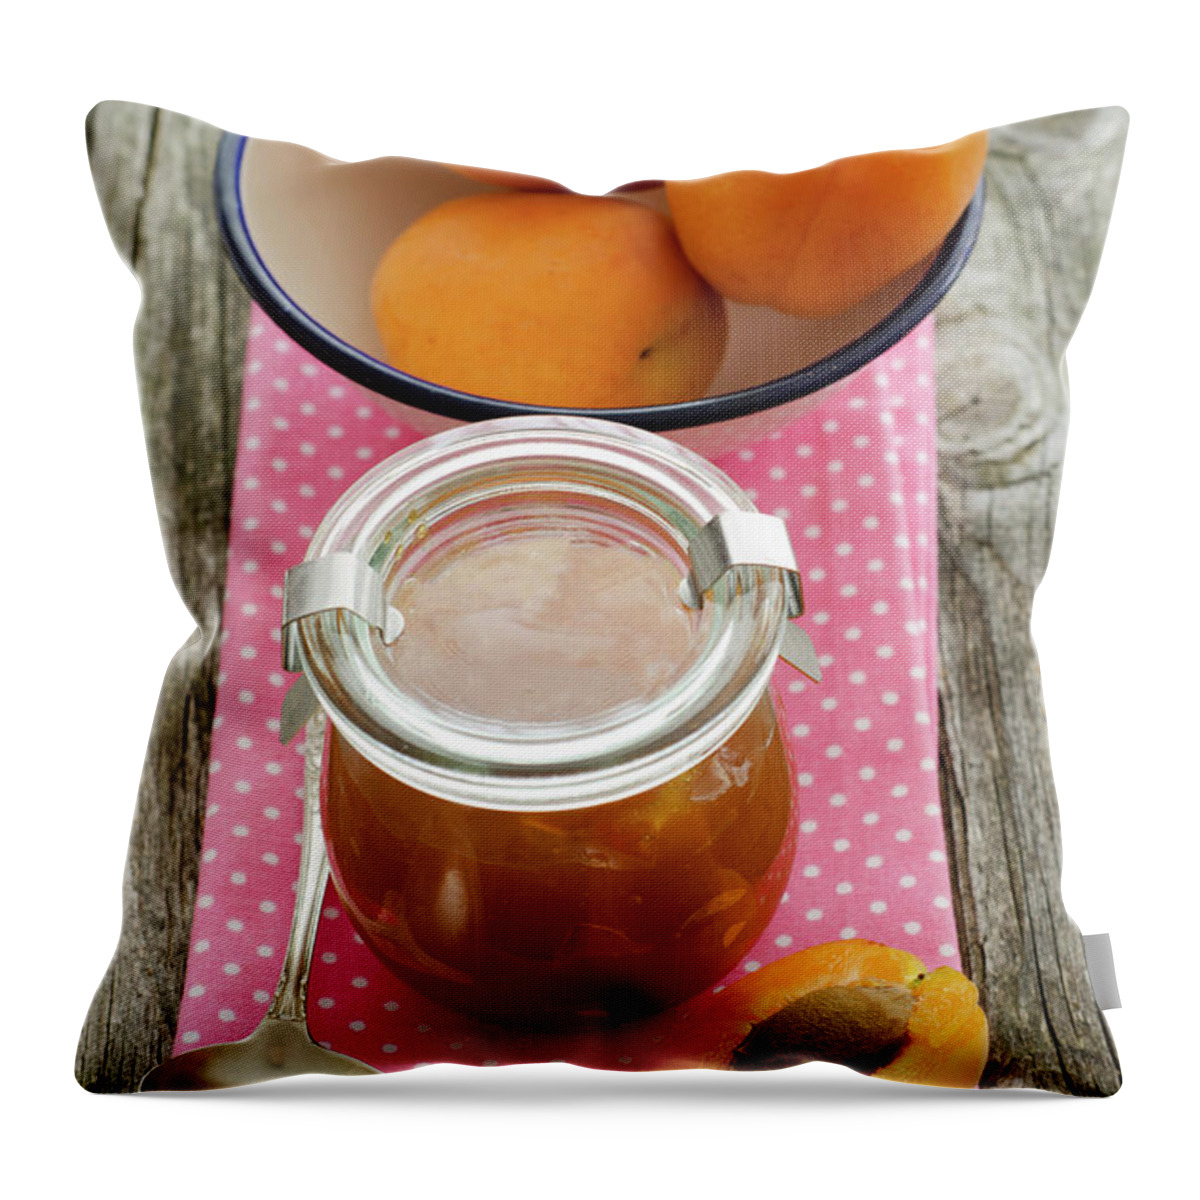 Spoon Throw Pillow featuring the photograph Apricot Jam With Bowl Of Apricots On by Westend61